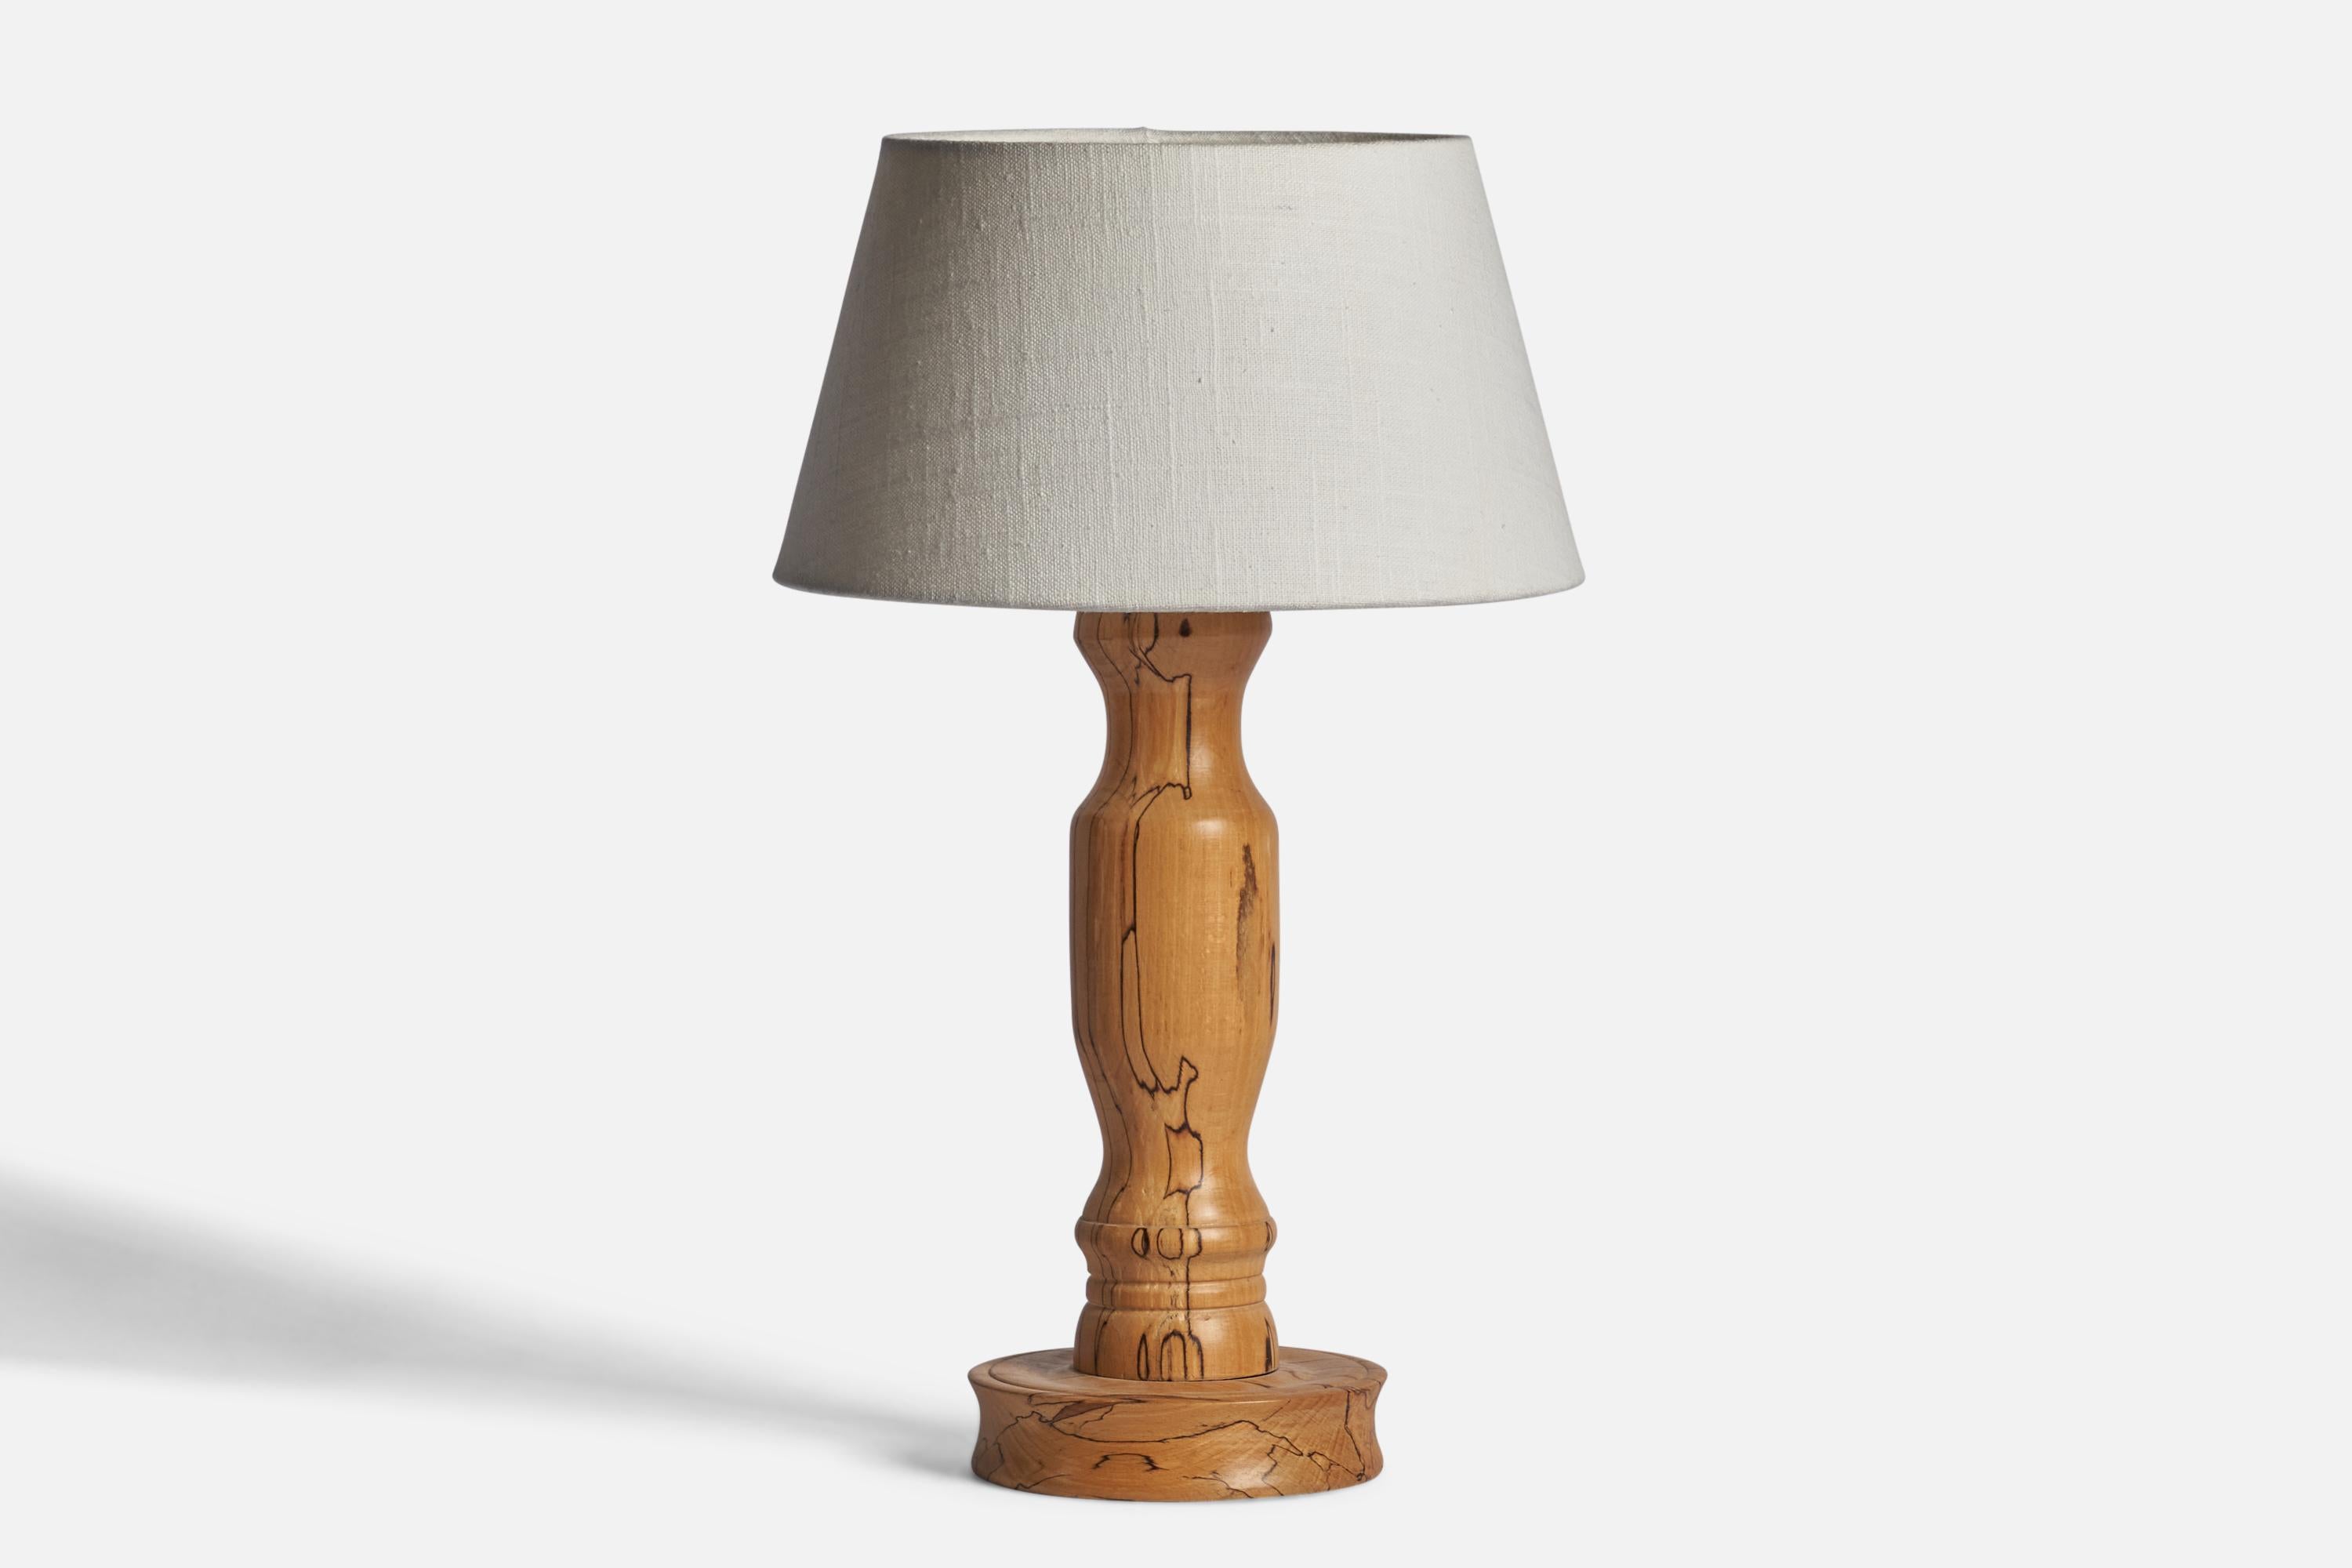 A masur birch table lamp designed and produced in Sweden, 1960s.

Dimensions of Lamp (inches): 13